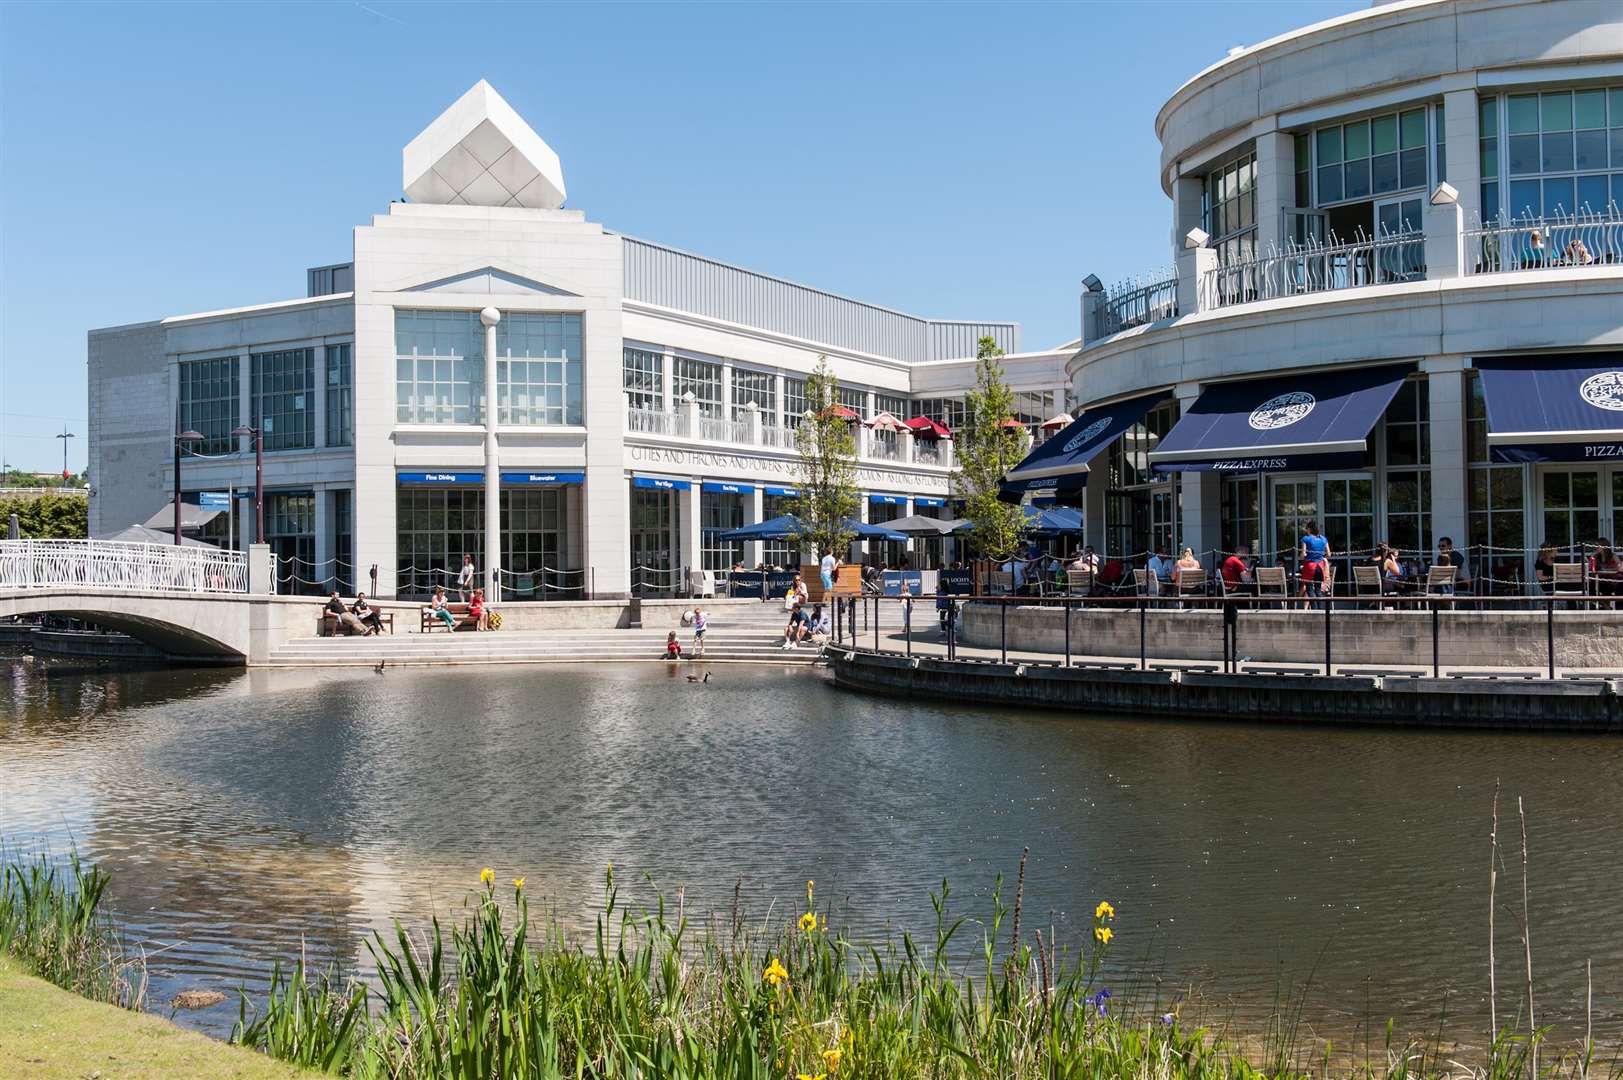 Bluewater, Dartford, was packed with parents trying to get to the Build-A-Bear workshop.